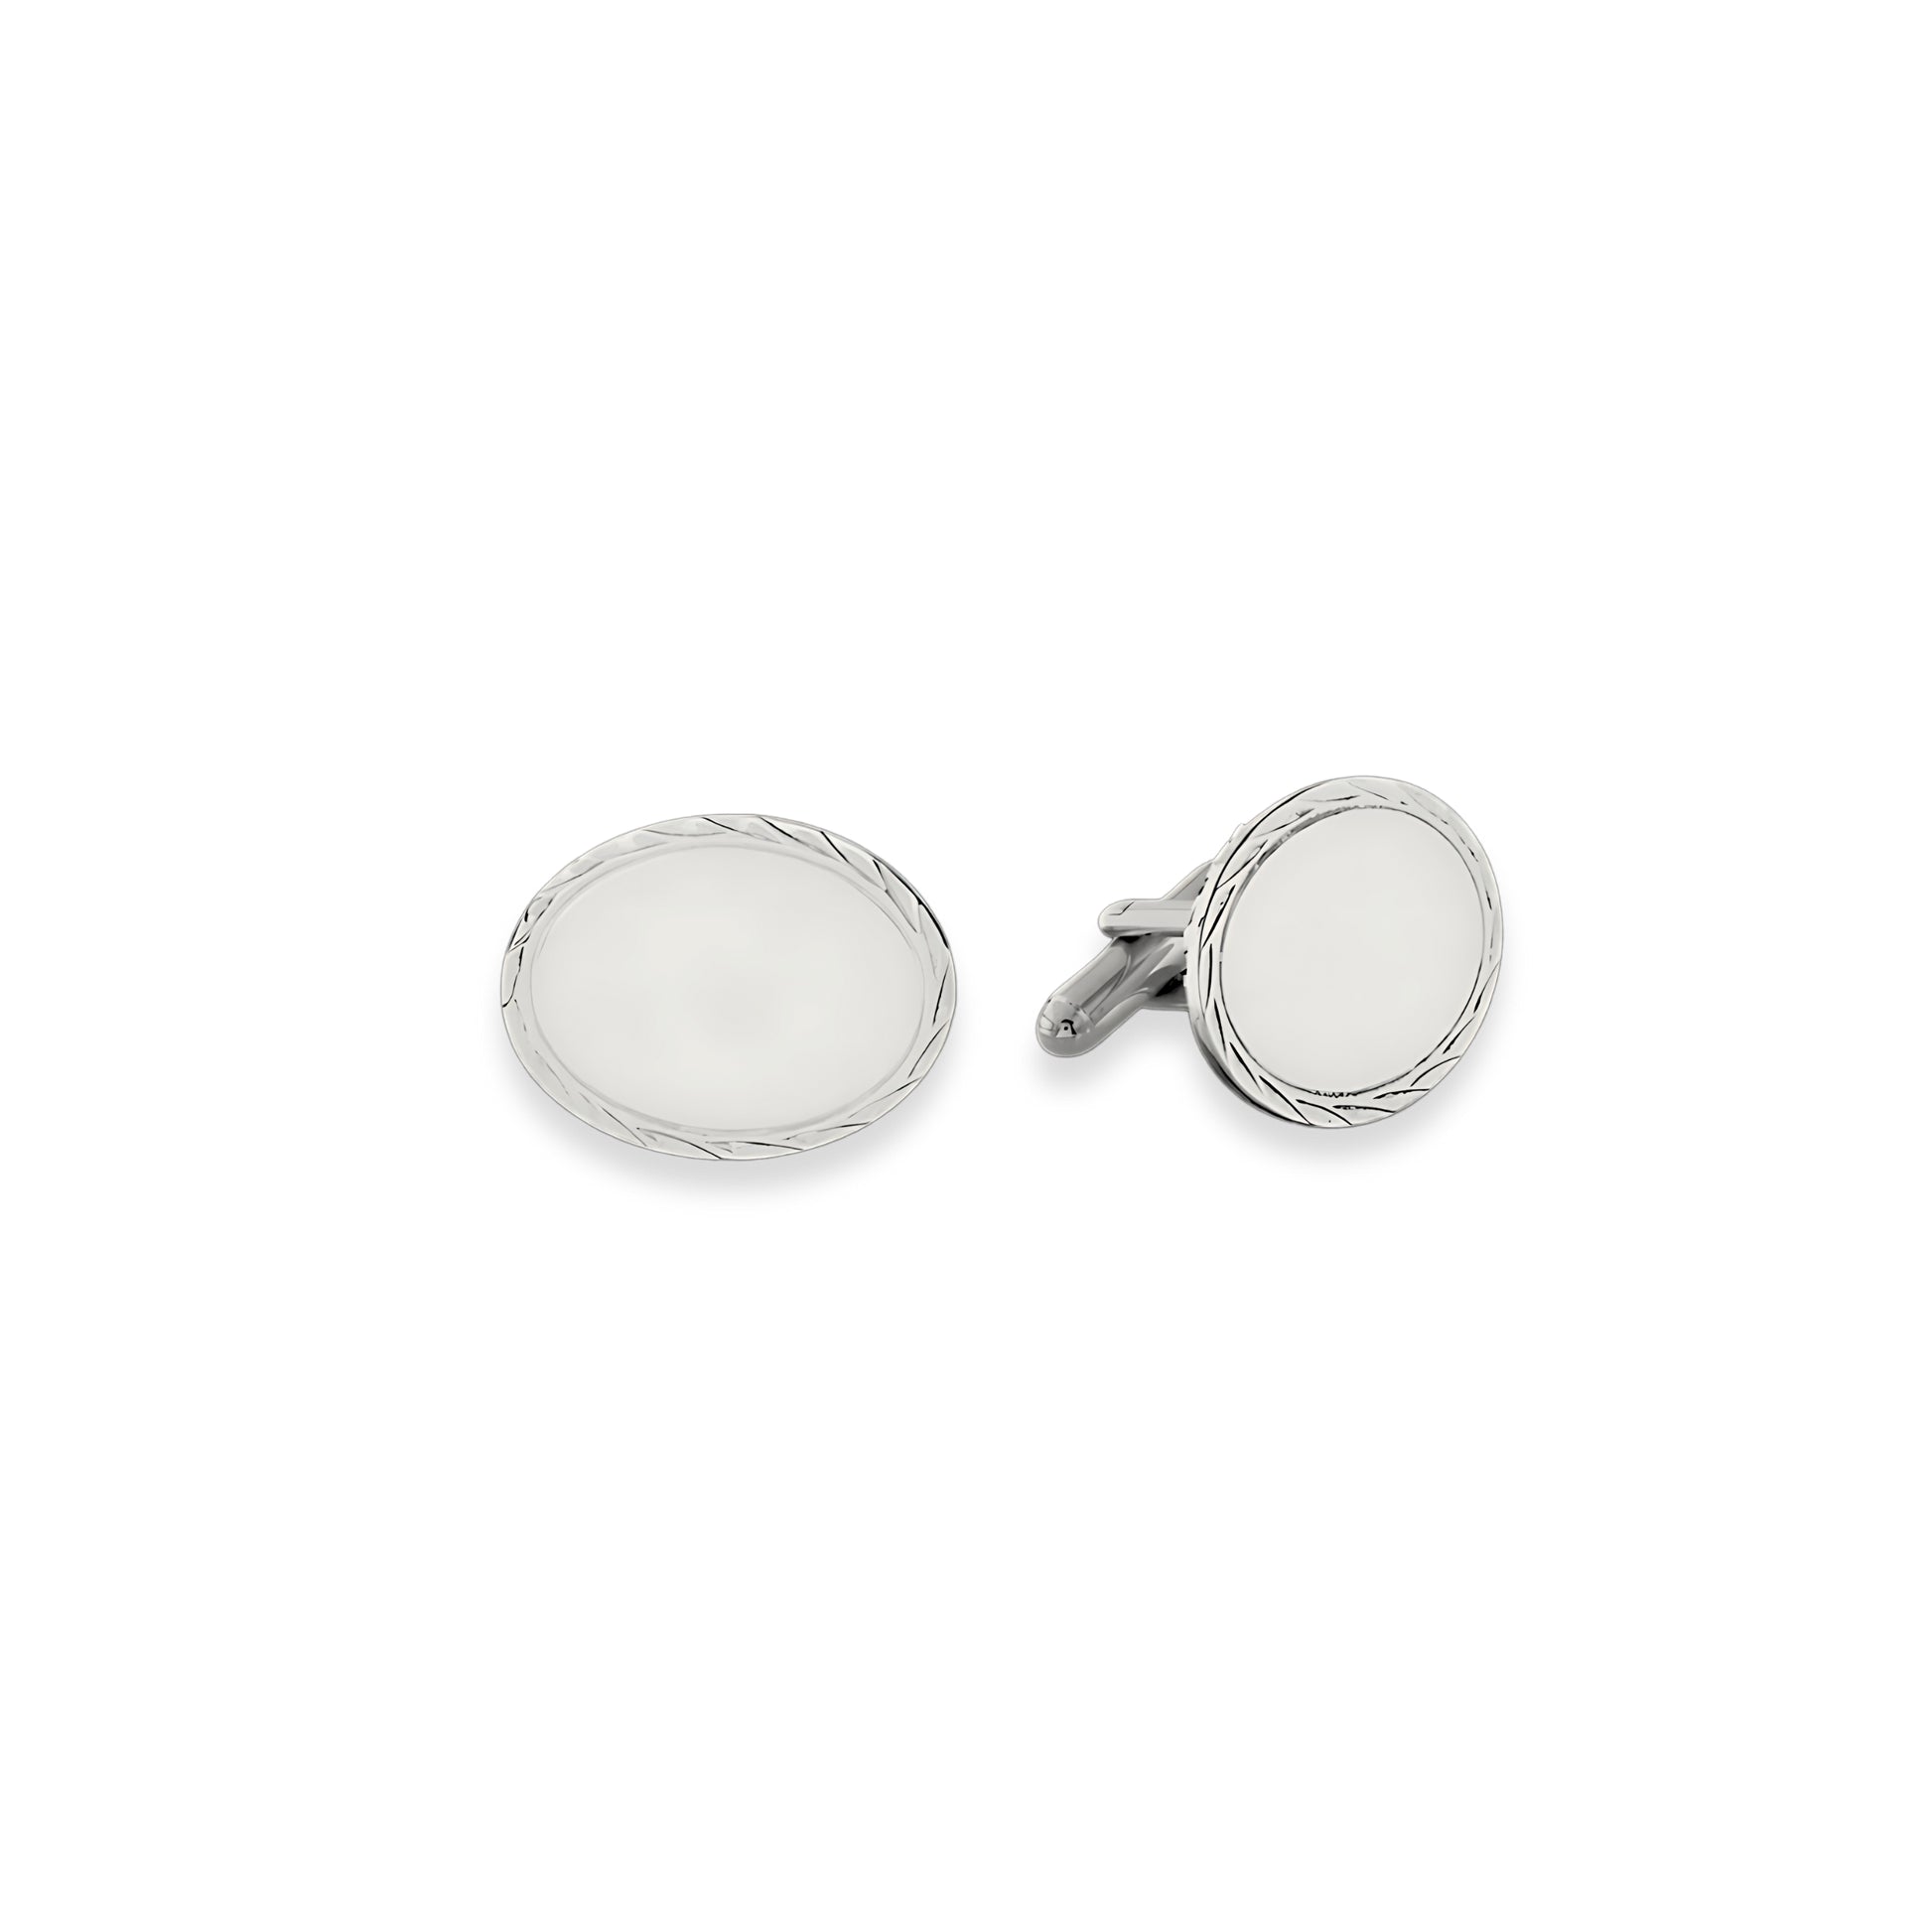 Sterling Silver Oval Cufflinks with Feathered Edge